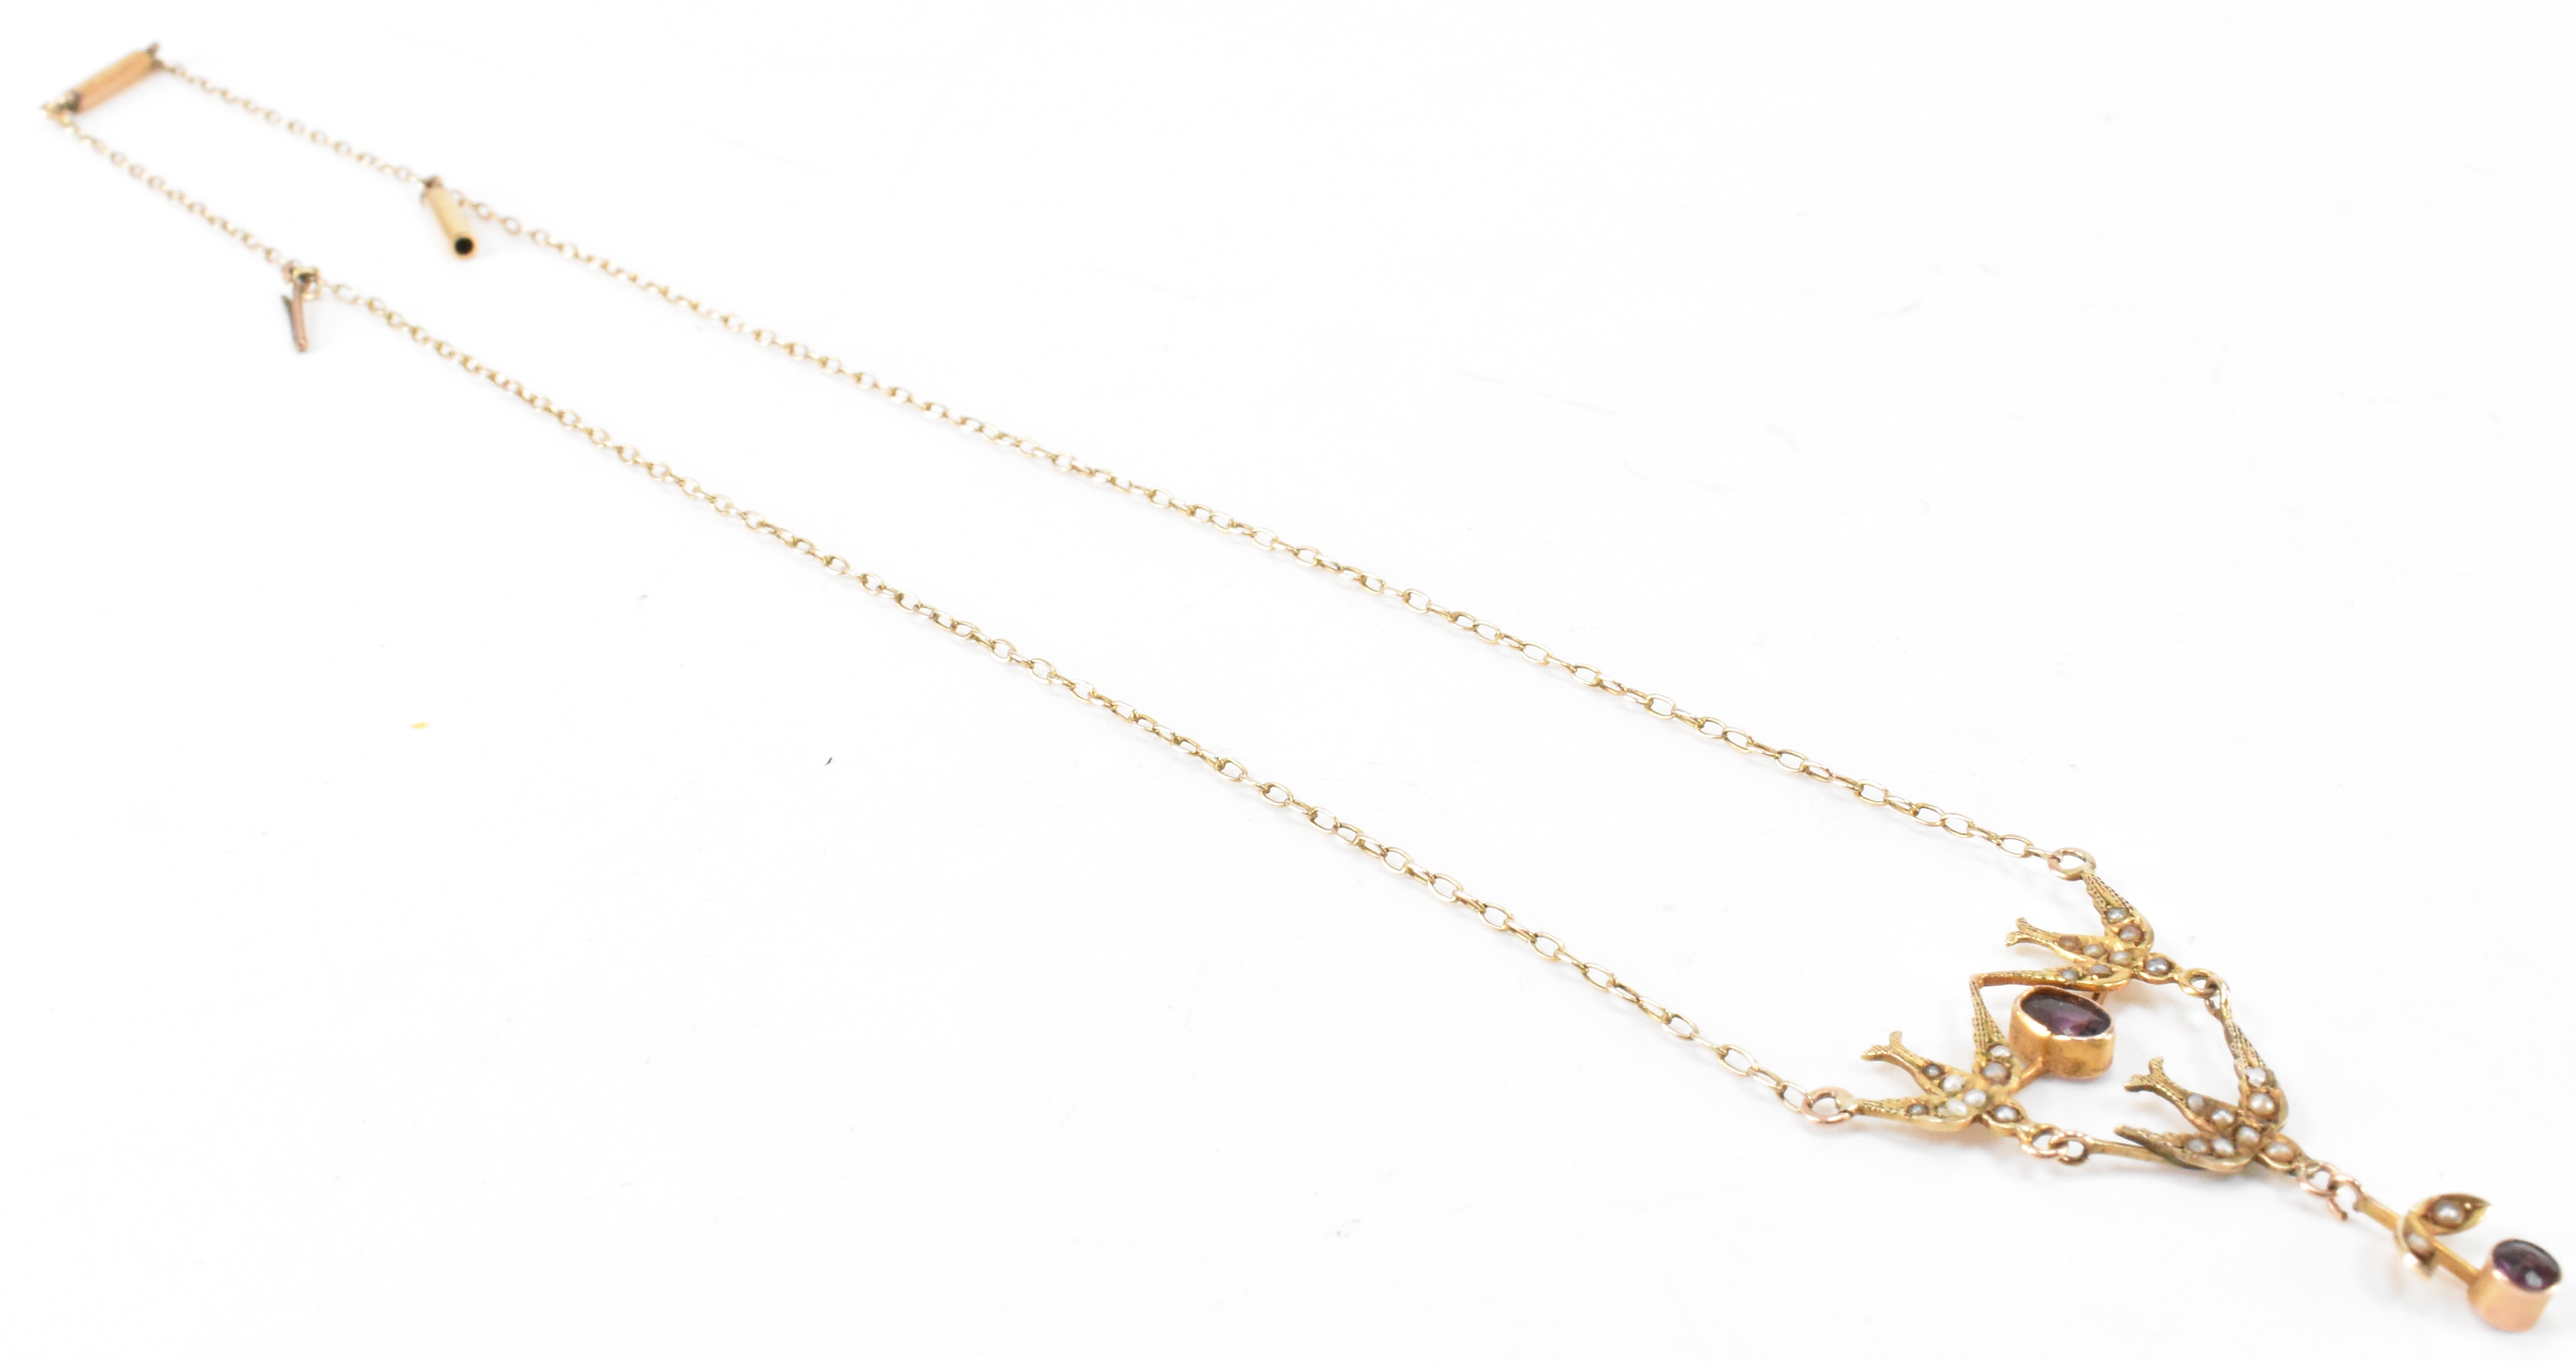 VICTORIAN GOLD SEEDPEARL & PASTE SWALLOW NECKLACE - Image 6 of 9